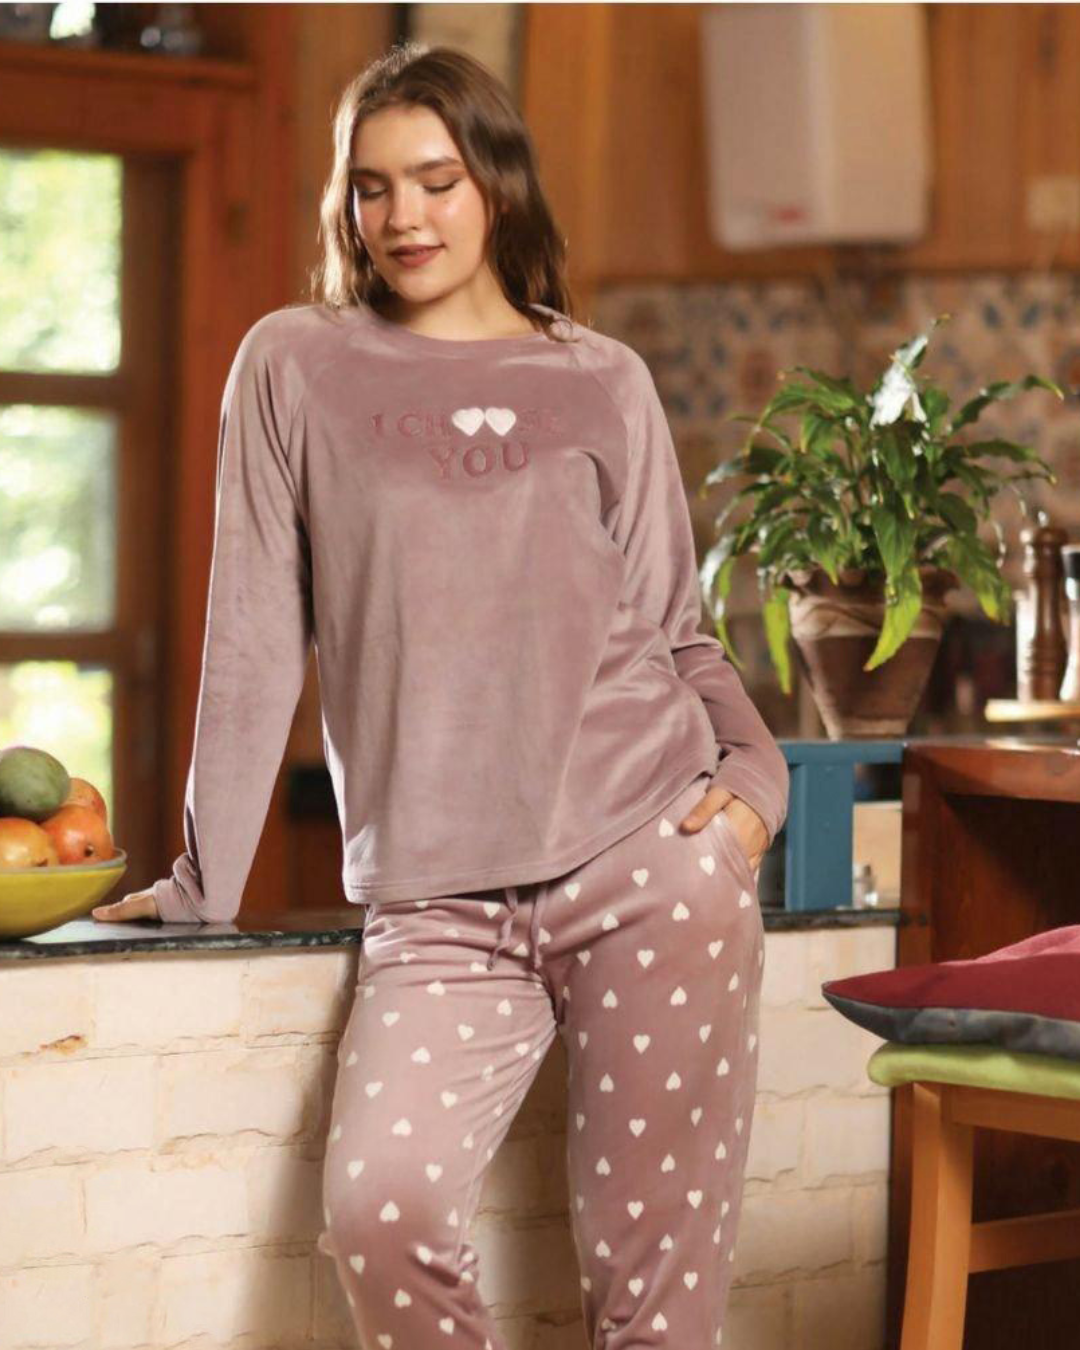 i choose you women's pajamas with hearts